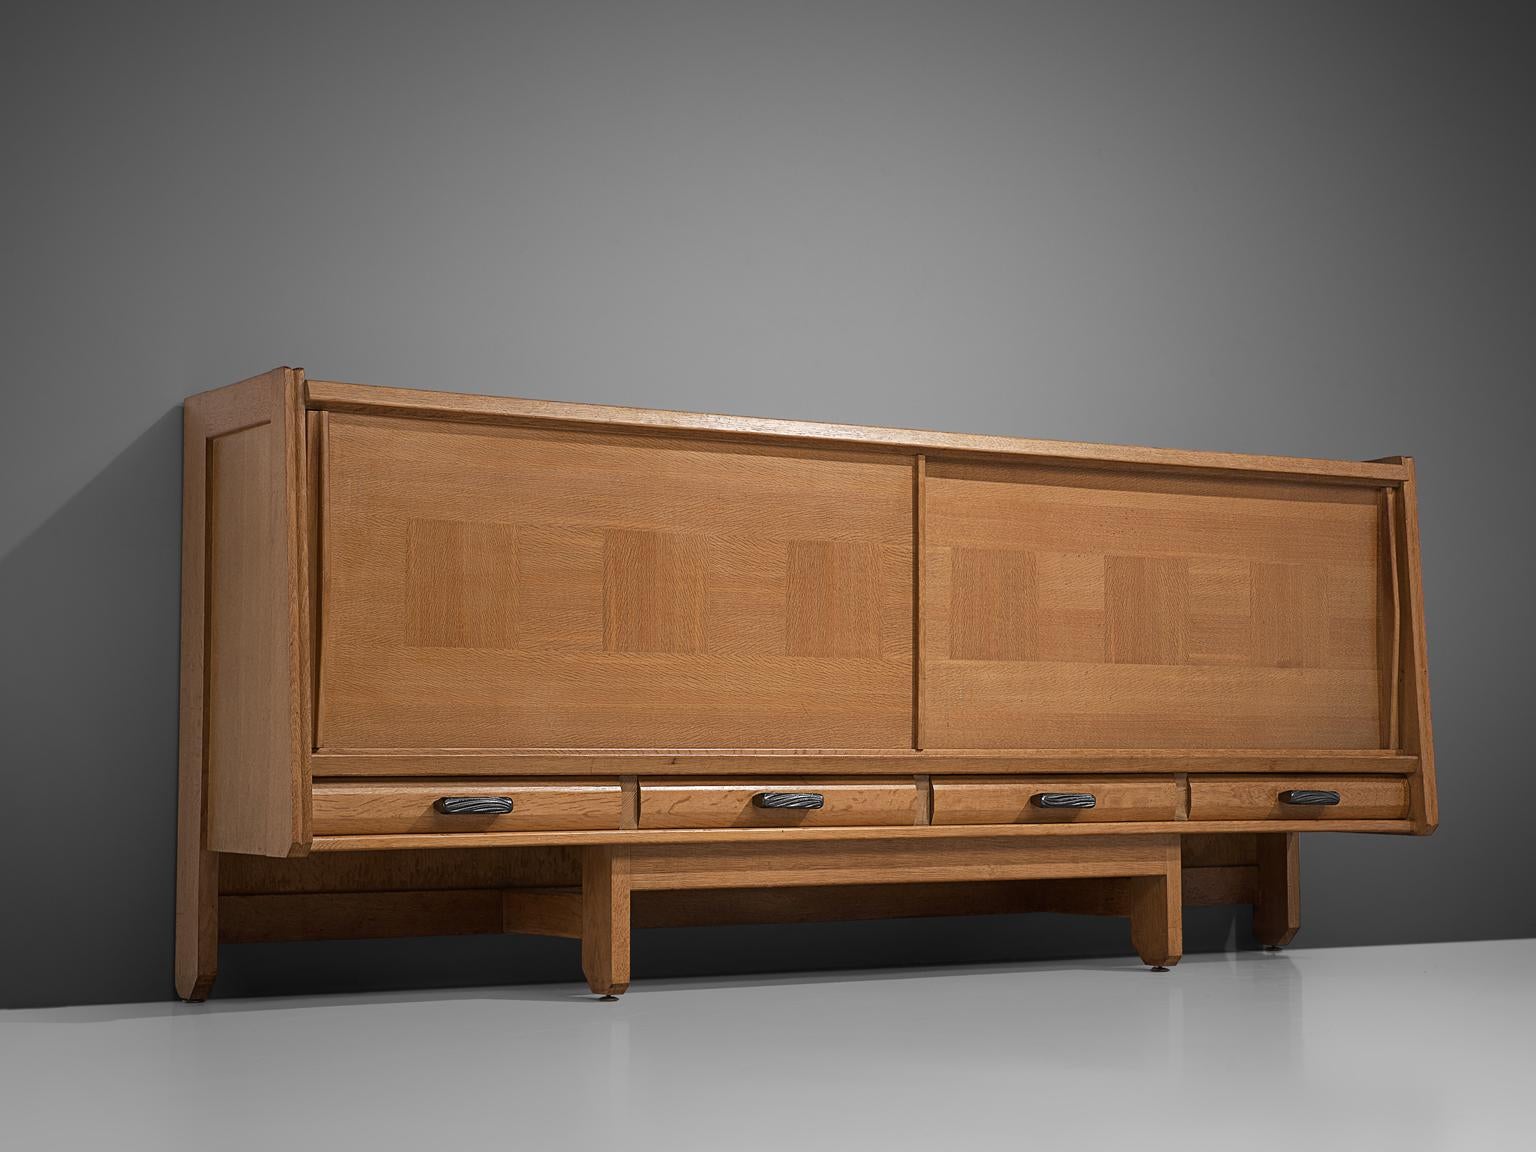 Guillerme et Chambron for Votre Maison, credenza, oak, France, 1960s. 

A sideboard with two sliding doors by French designer duo Guillerme and Chambron. This quite solid cabinet holds beautiful inlaid woodwork. Underneath the sliding doors there